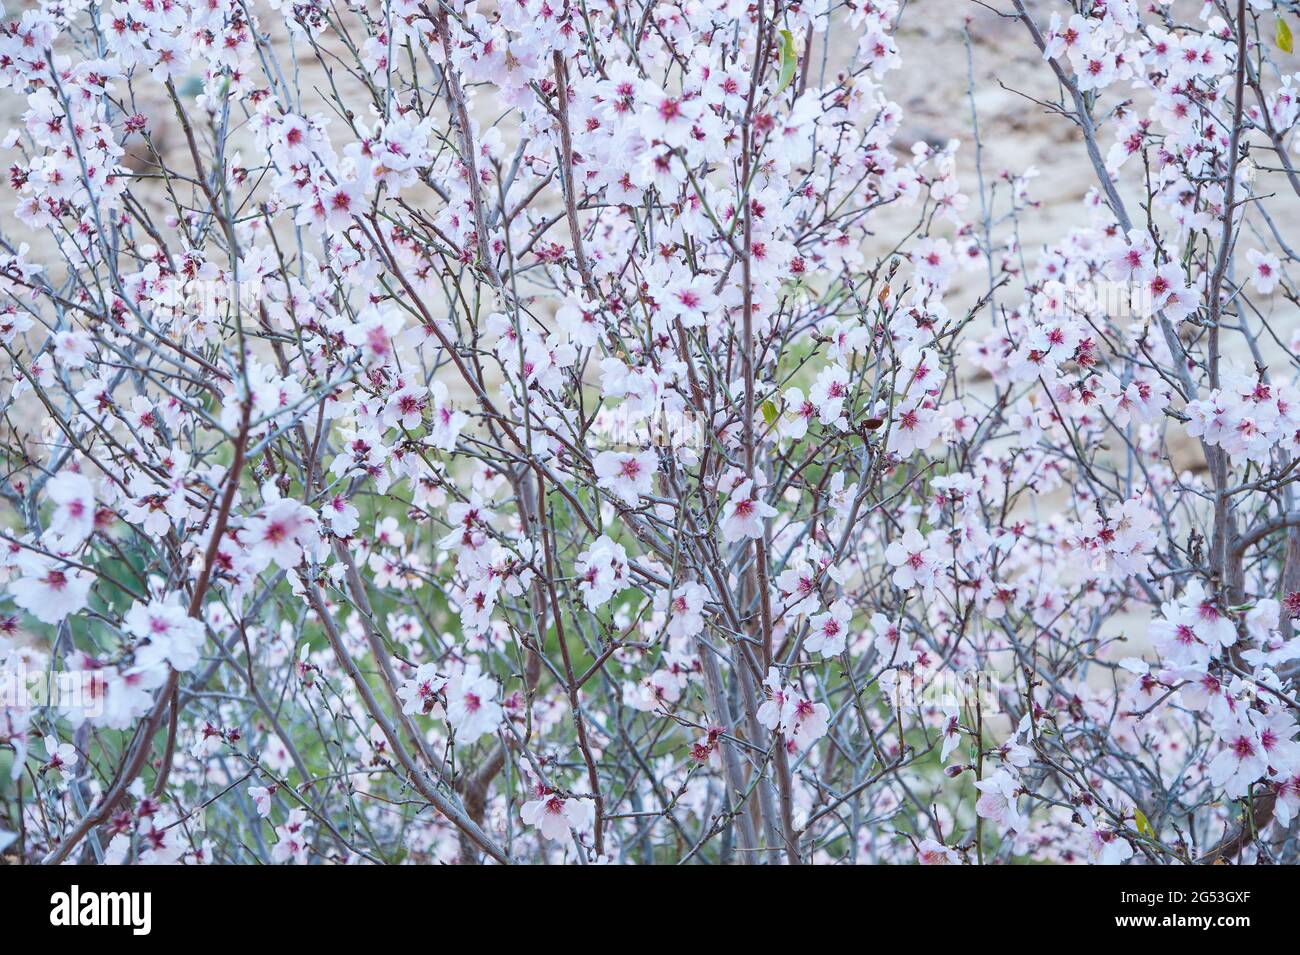 EGYPT, SINAI: Blooming almond trees. The town of Saint Catherine lies 1600m above sea level at the foot of the Sinai mountains. Mostly know for its fa Stock Photo